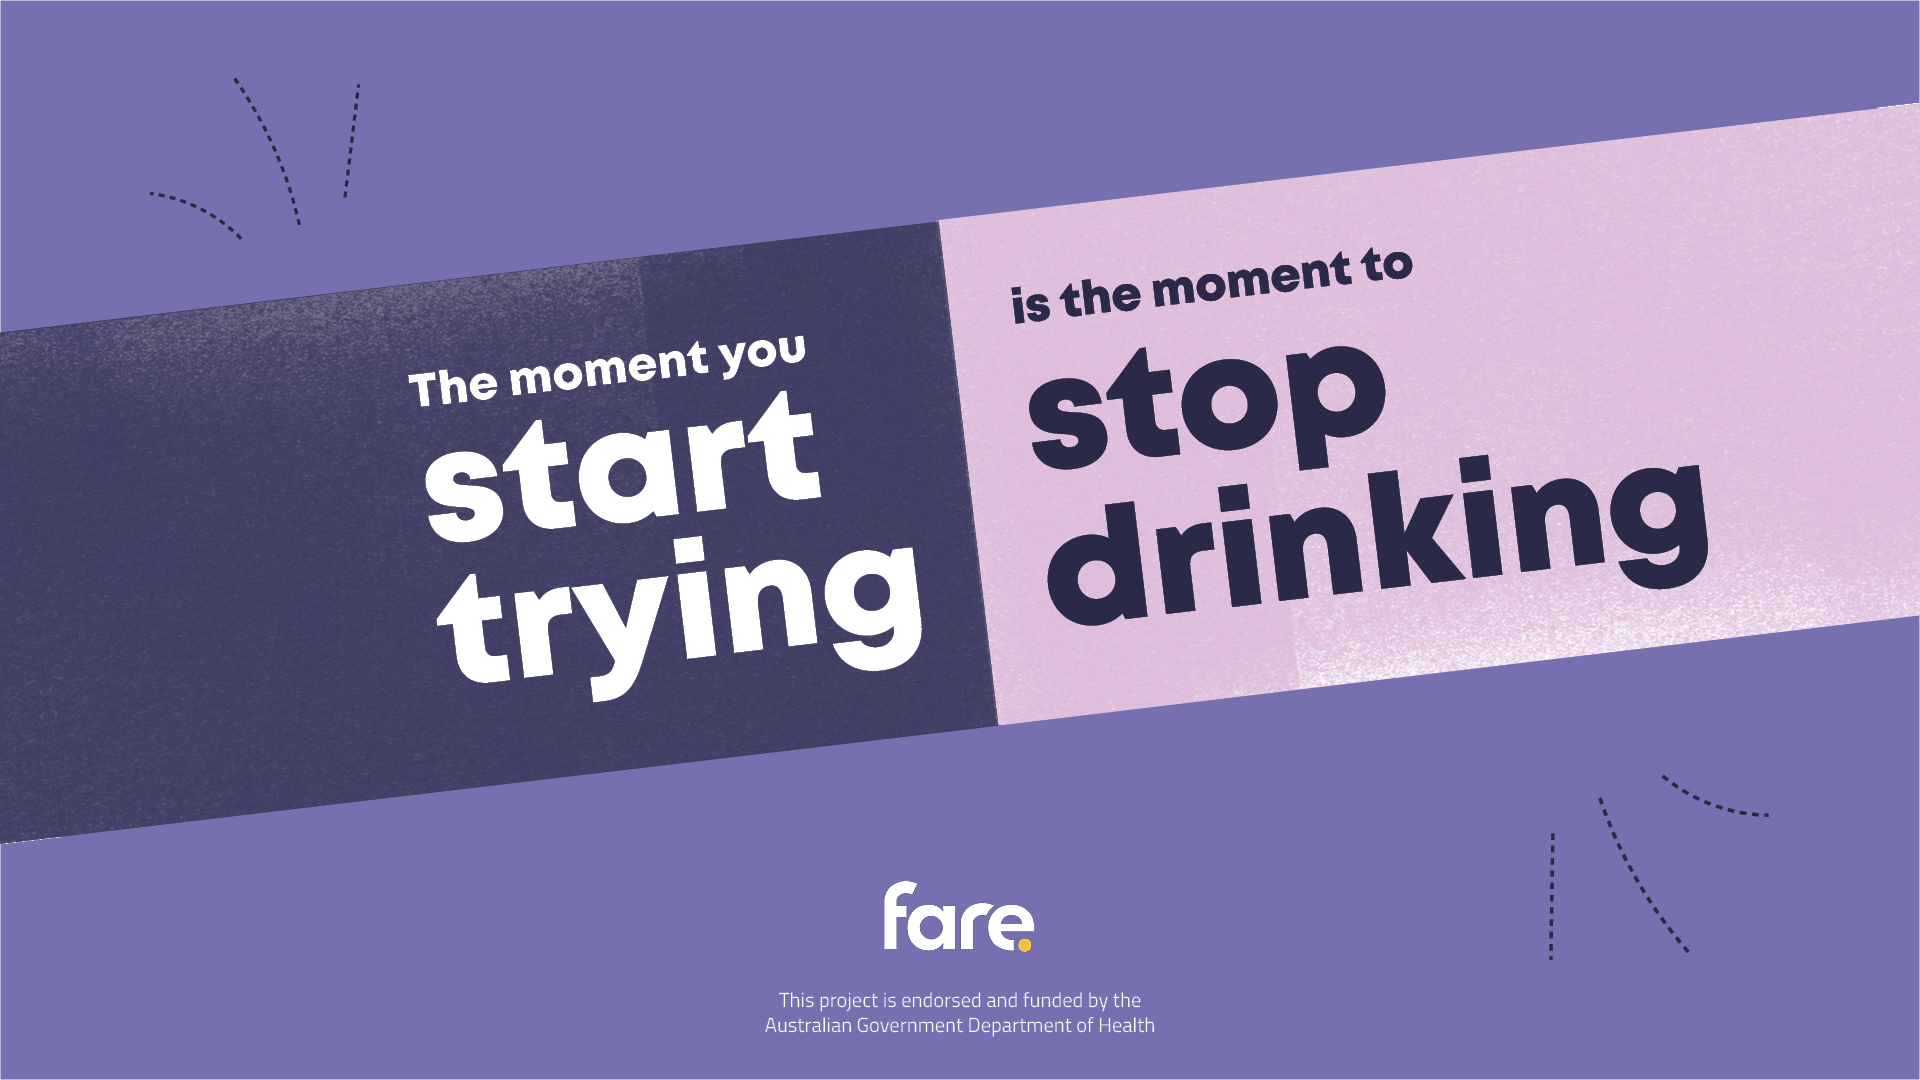 Whit text on purple background "The moment you start trying is the moment to stop drinking" with FARE logo and texct "This project is endorsed and funded by the Australian Govenrment Department of Health"